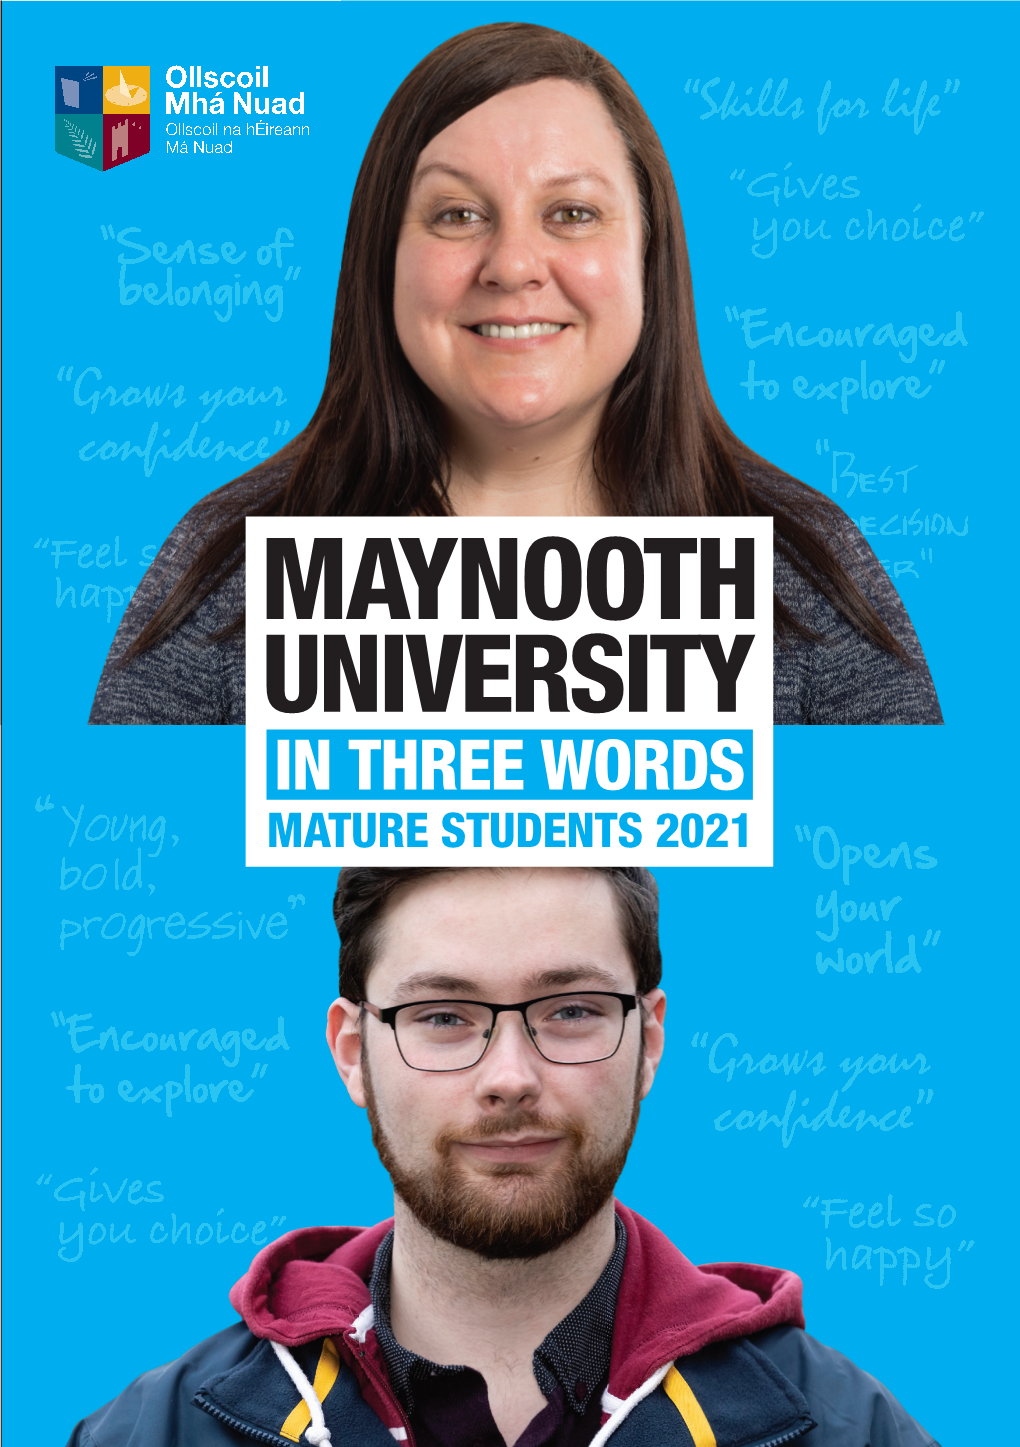 Maynooth University in Three Words Mature Students 2021 Contents